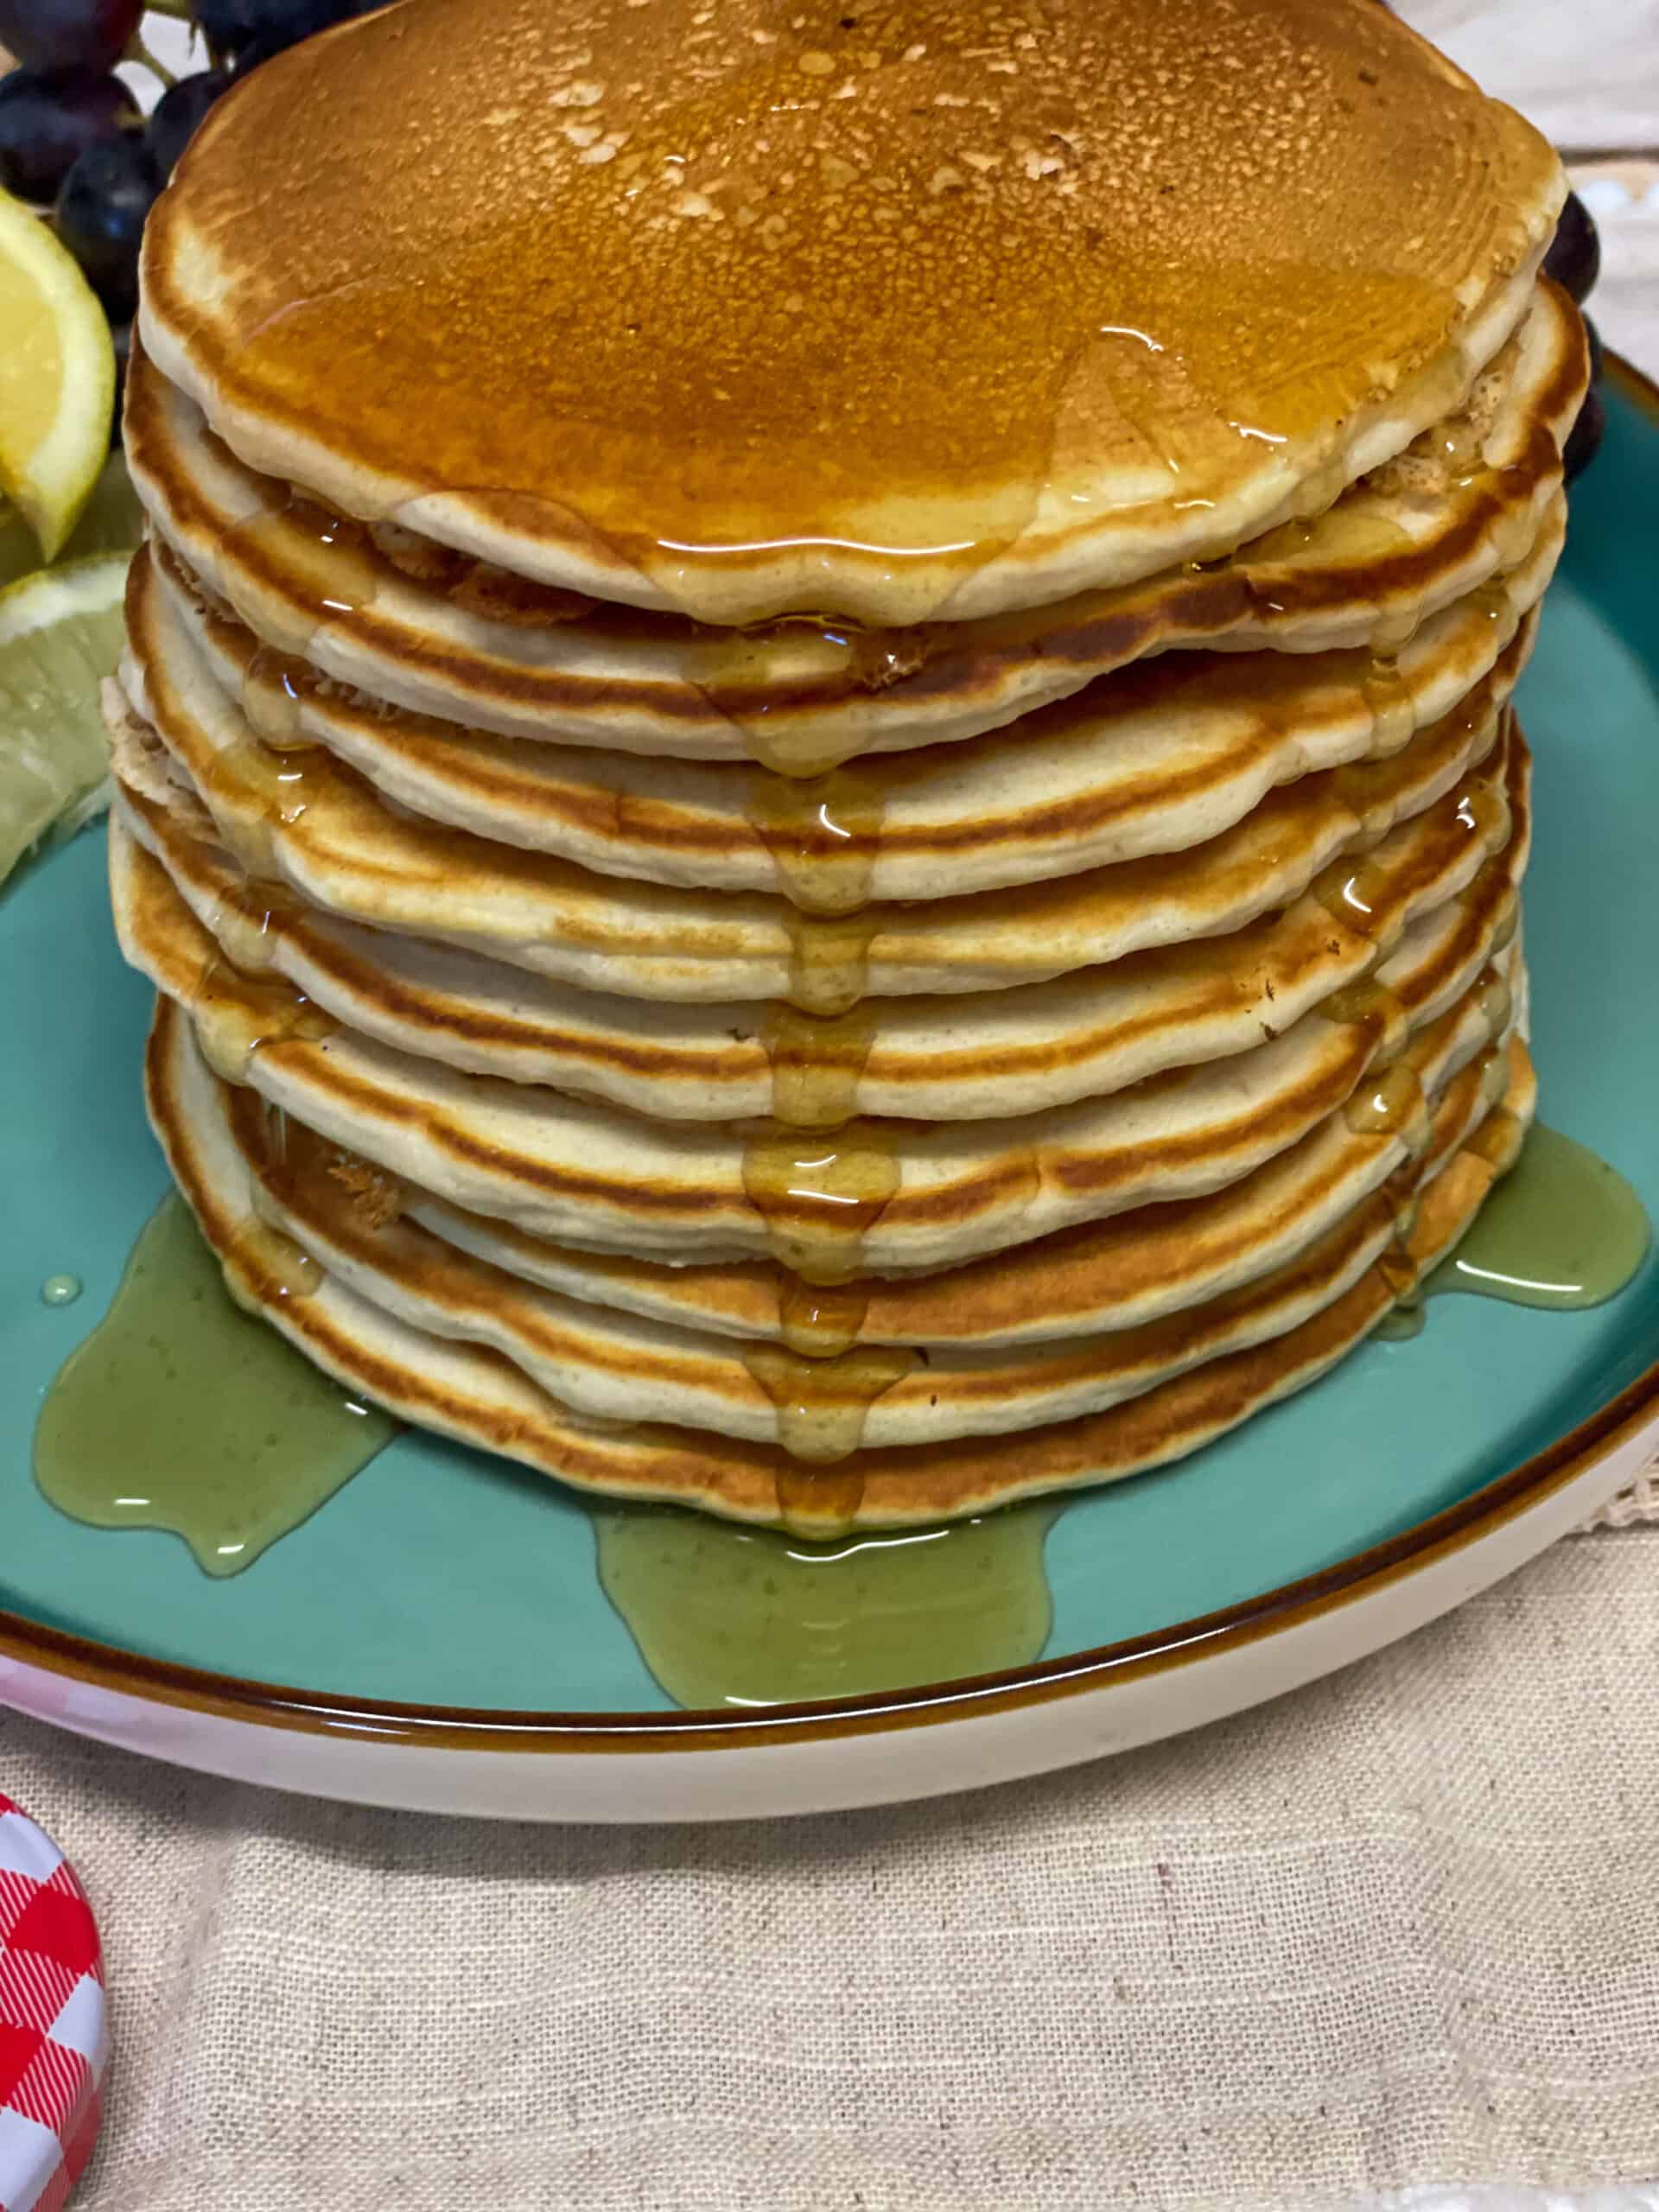 A stack of pancakes with syrup drizzling down the sides and on a turquoise plate.